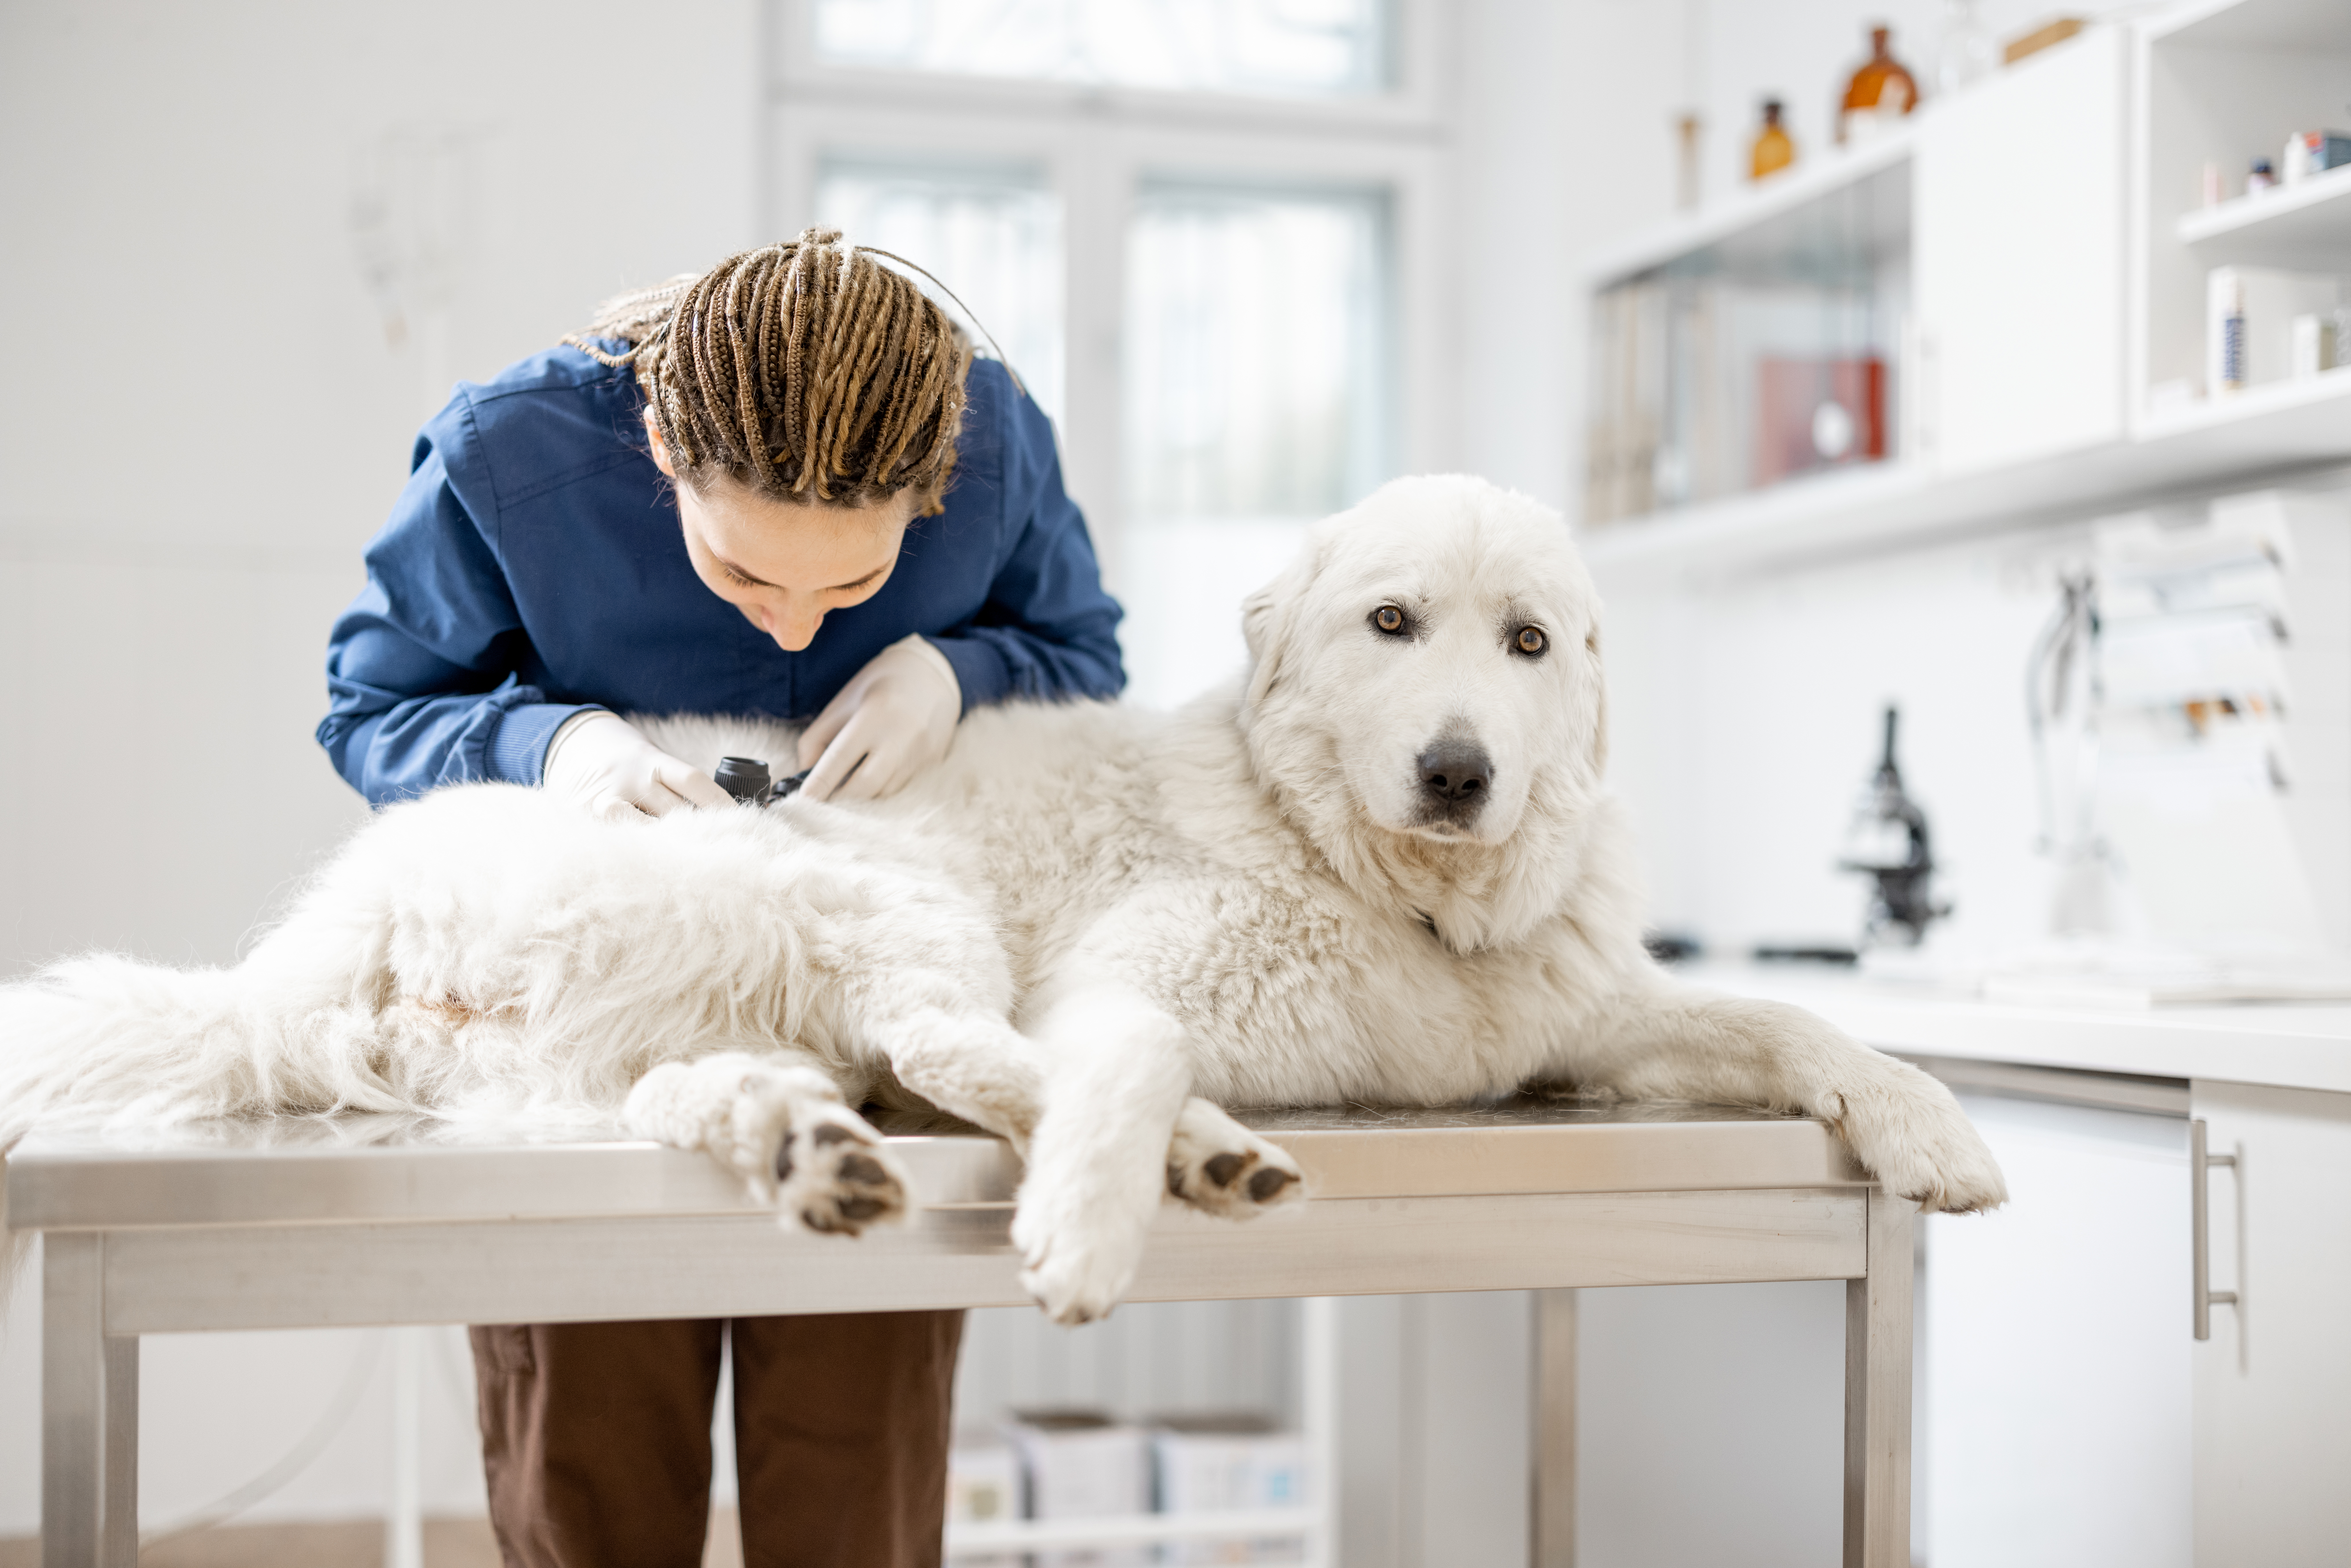 Pet Skin Care - Veterinarian,Looks,At,The,Dog's,Skin,And,Fur,To,Check